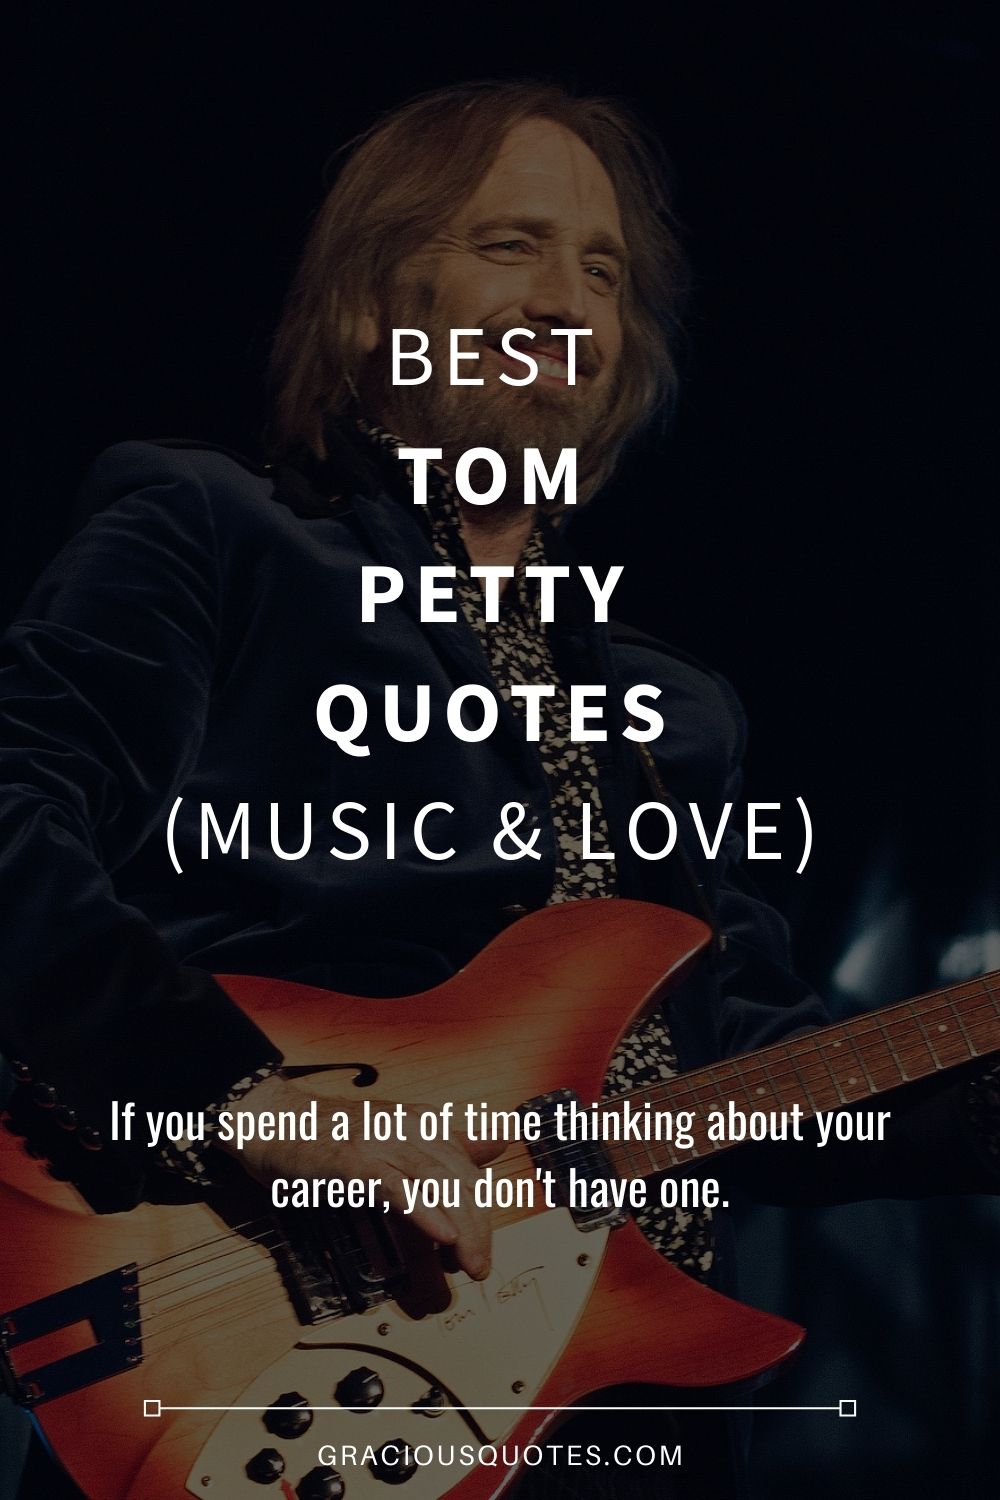 Best Tom Petty Quotes (MUSIC & LOVE) - Gracious Quotes